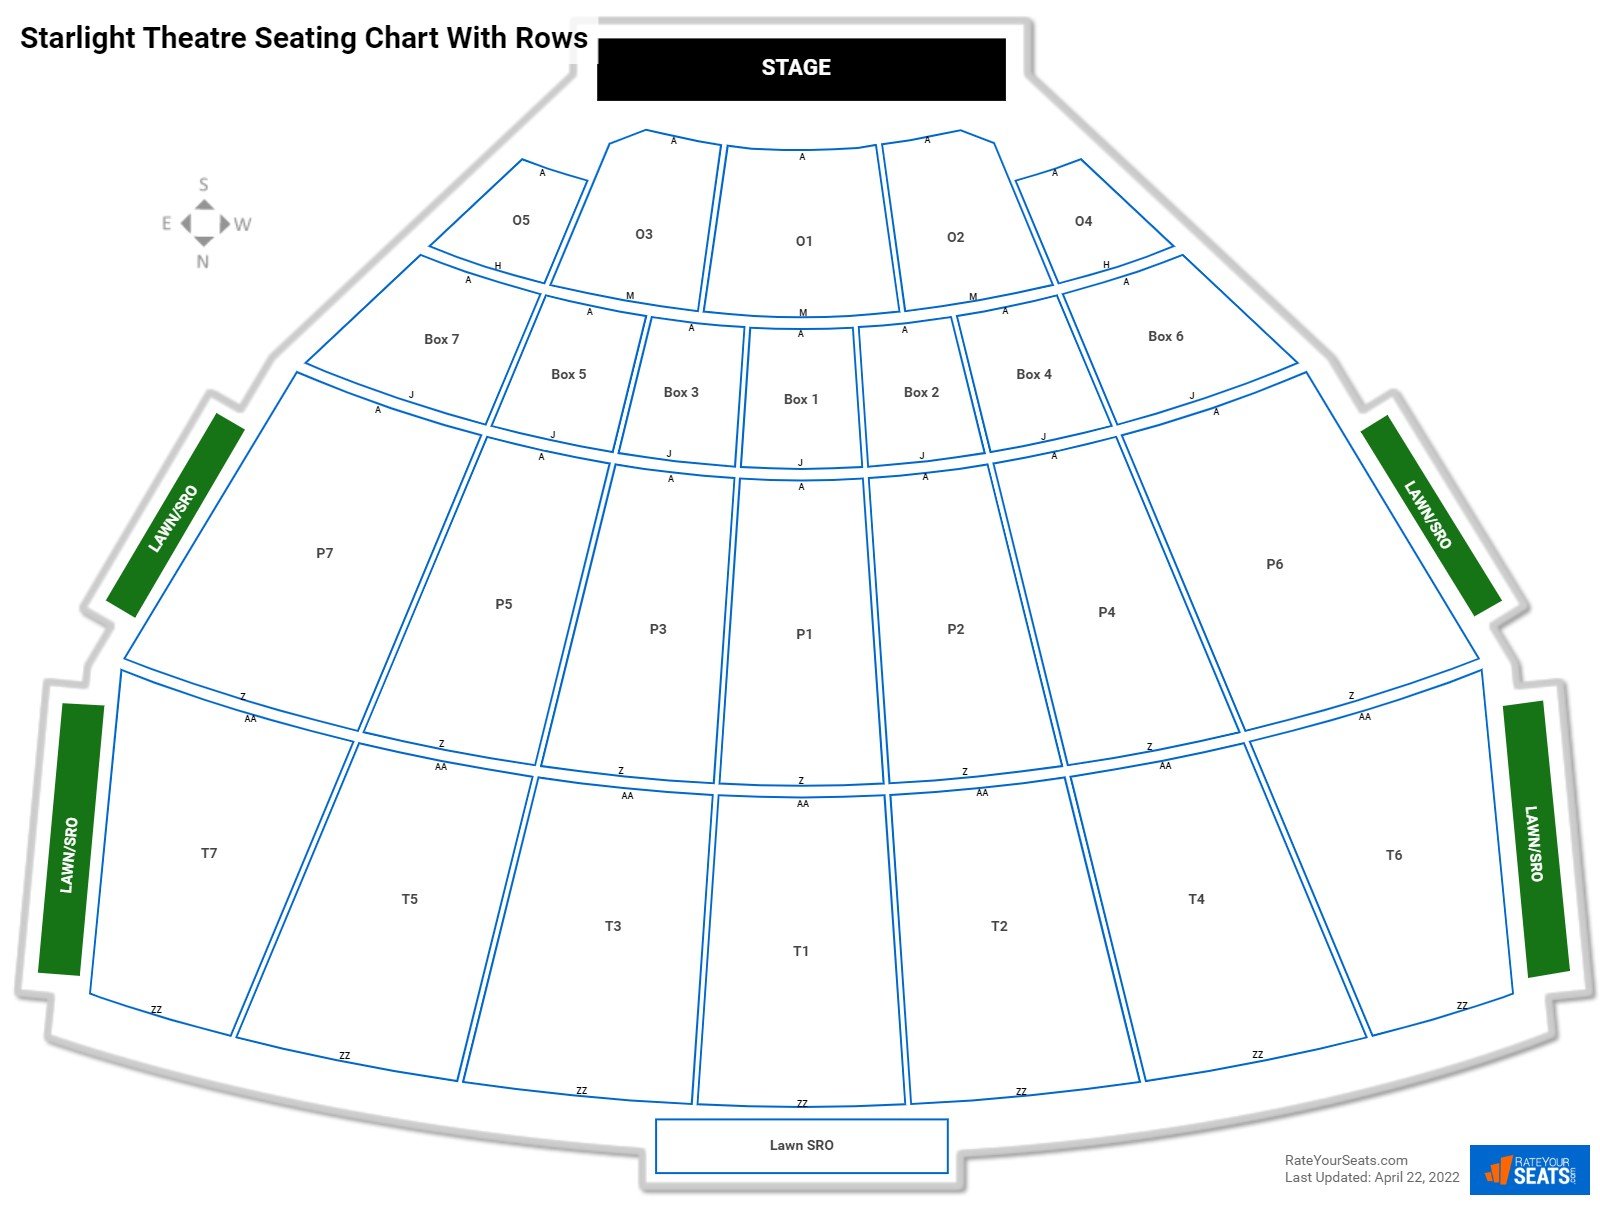 Starlight Theatre seating chart with row numbers